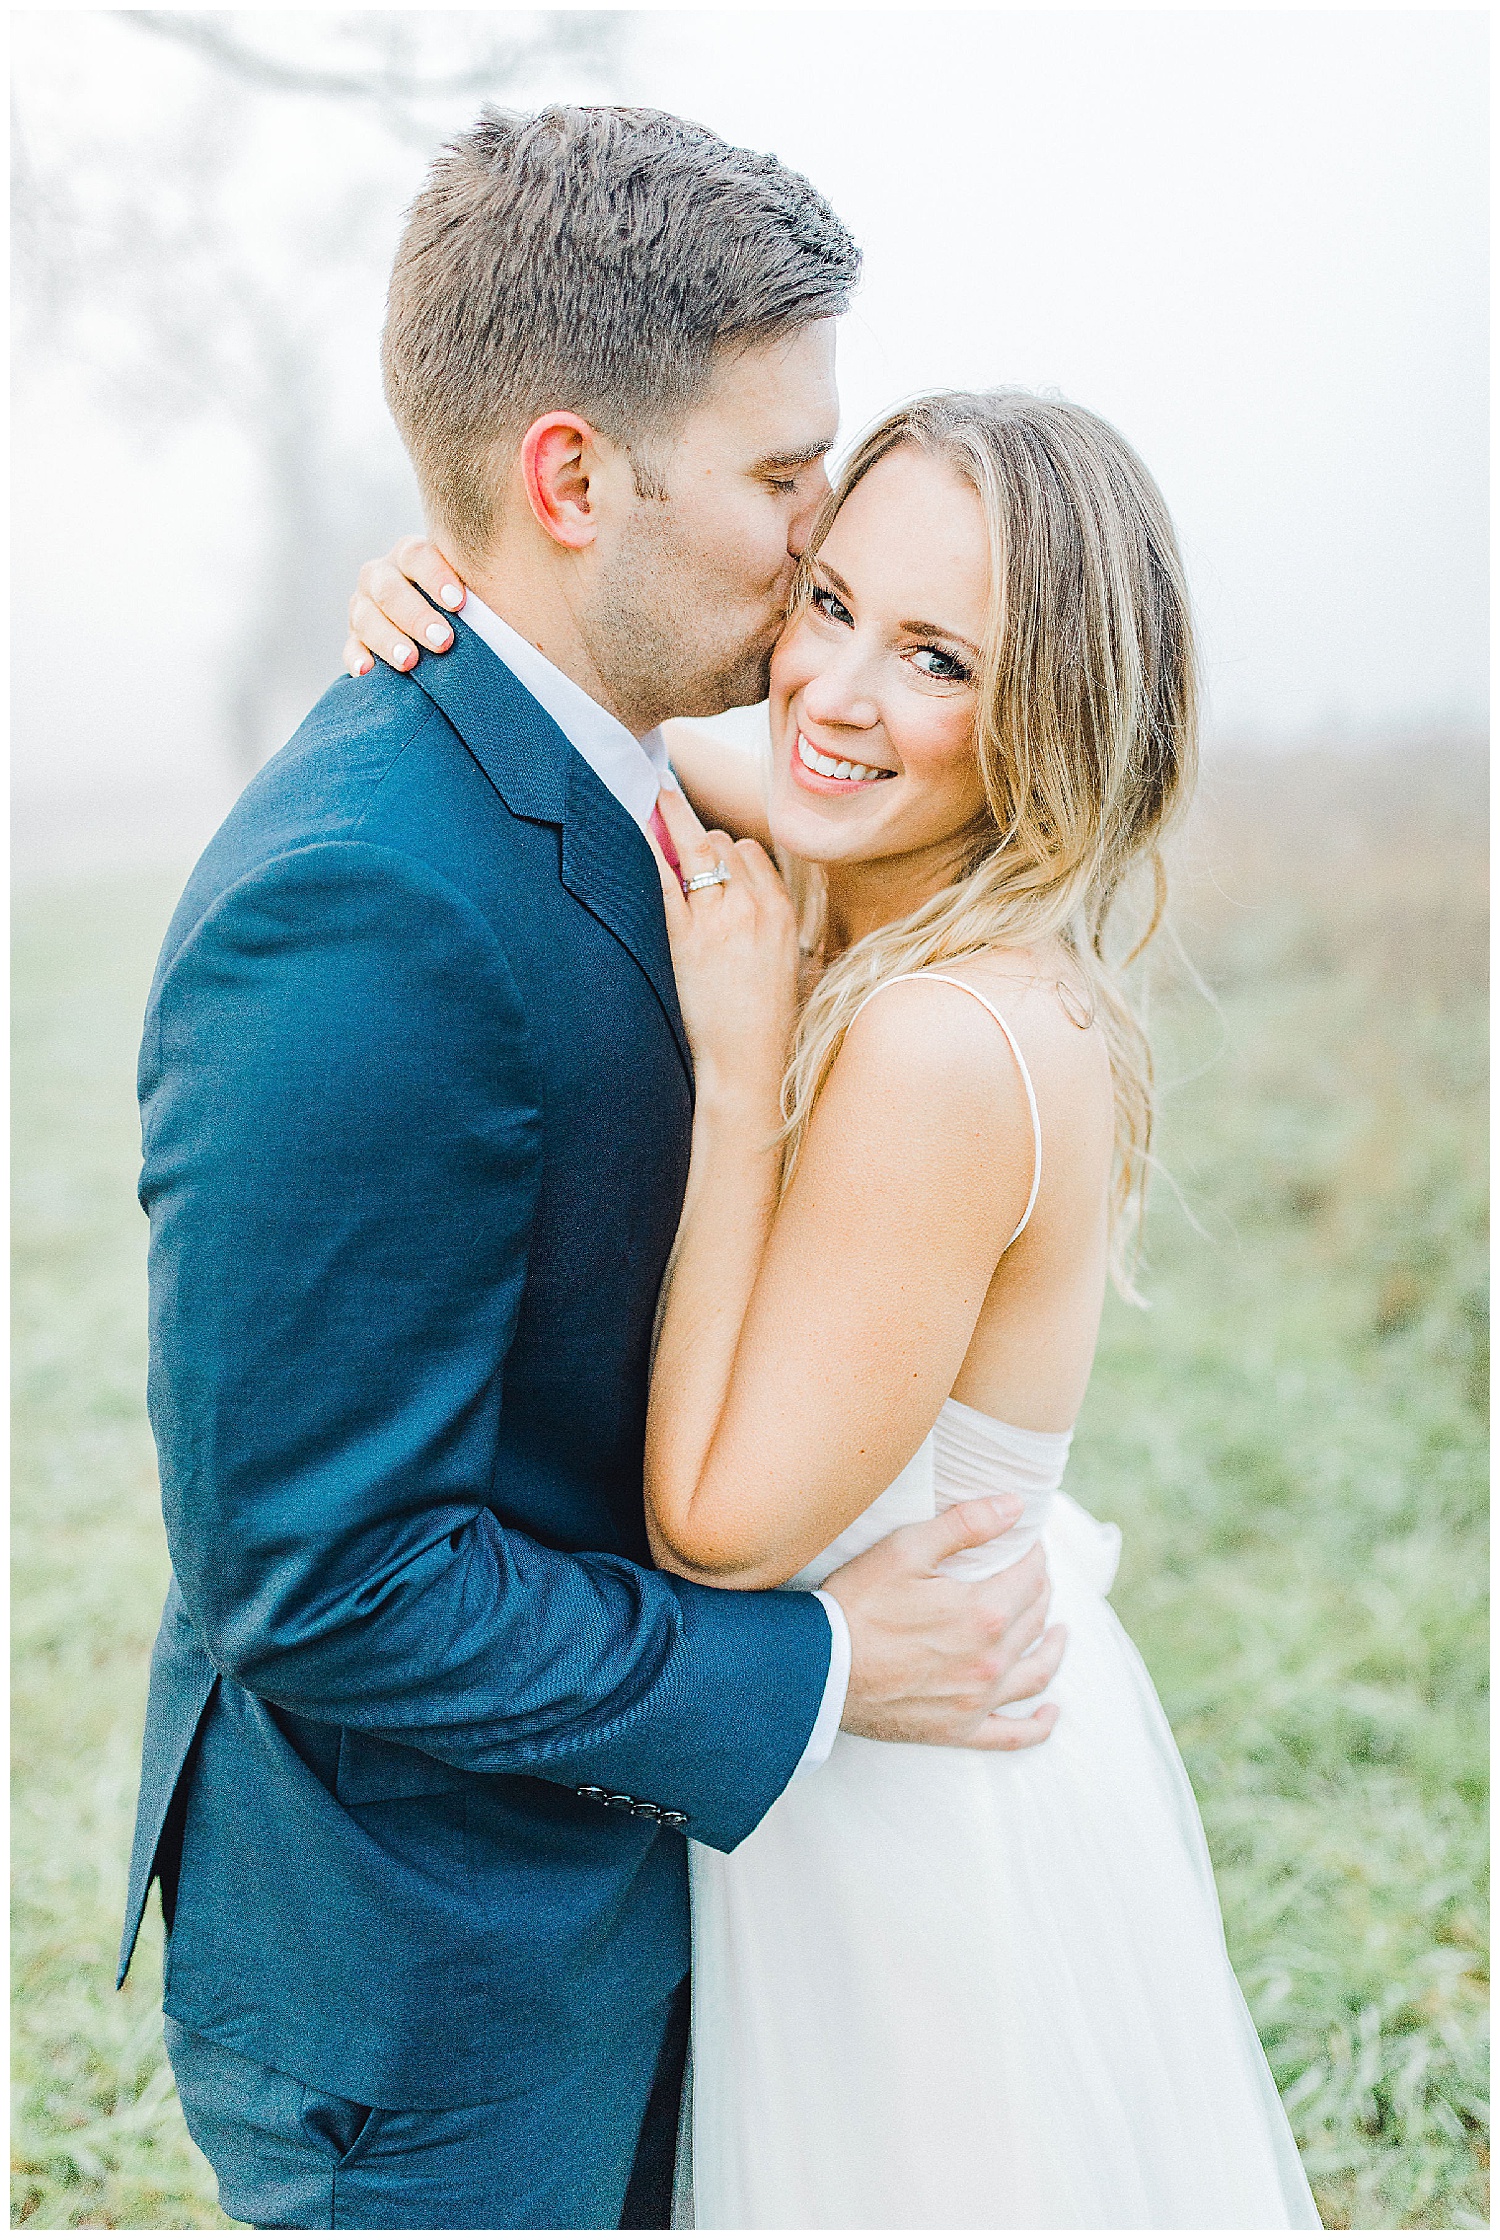 Emma Rose Company recently got to travel all the way to Nashville to photograph the most beautiful post-wedding bride and groom portraits in the Great Smoky Mountains with a gorgeous couple! Nashville wedding inspiration at it's finest._0014.jpg